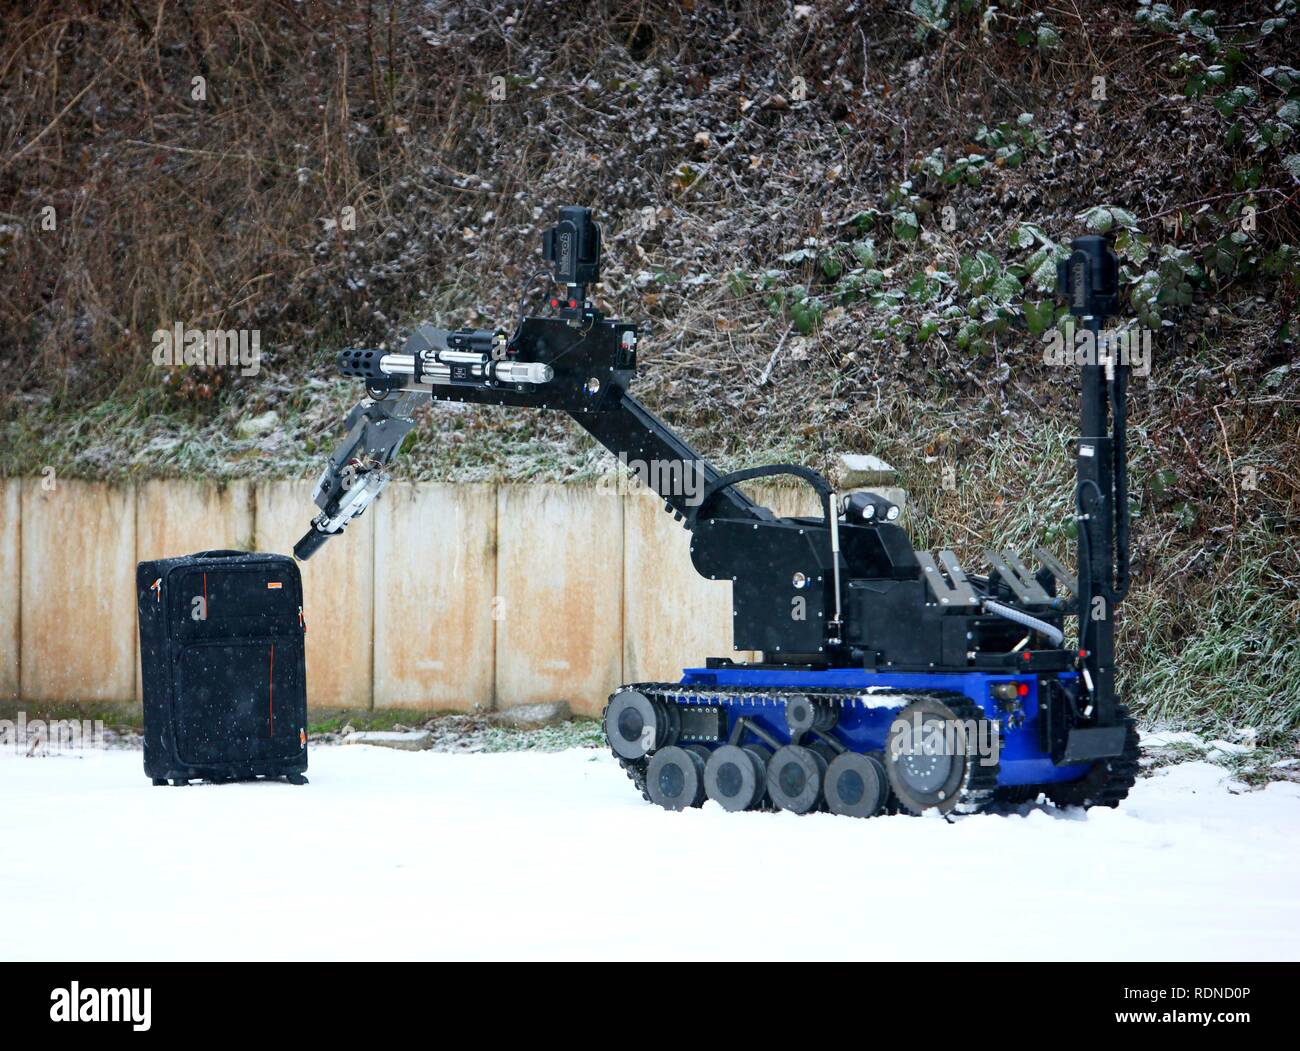 Radio control robot from the Telerob company to defuse explosives, bombs and other dangerous devices by remote control, the Stock Photo